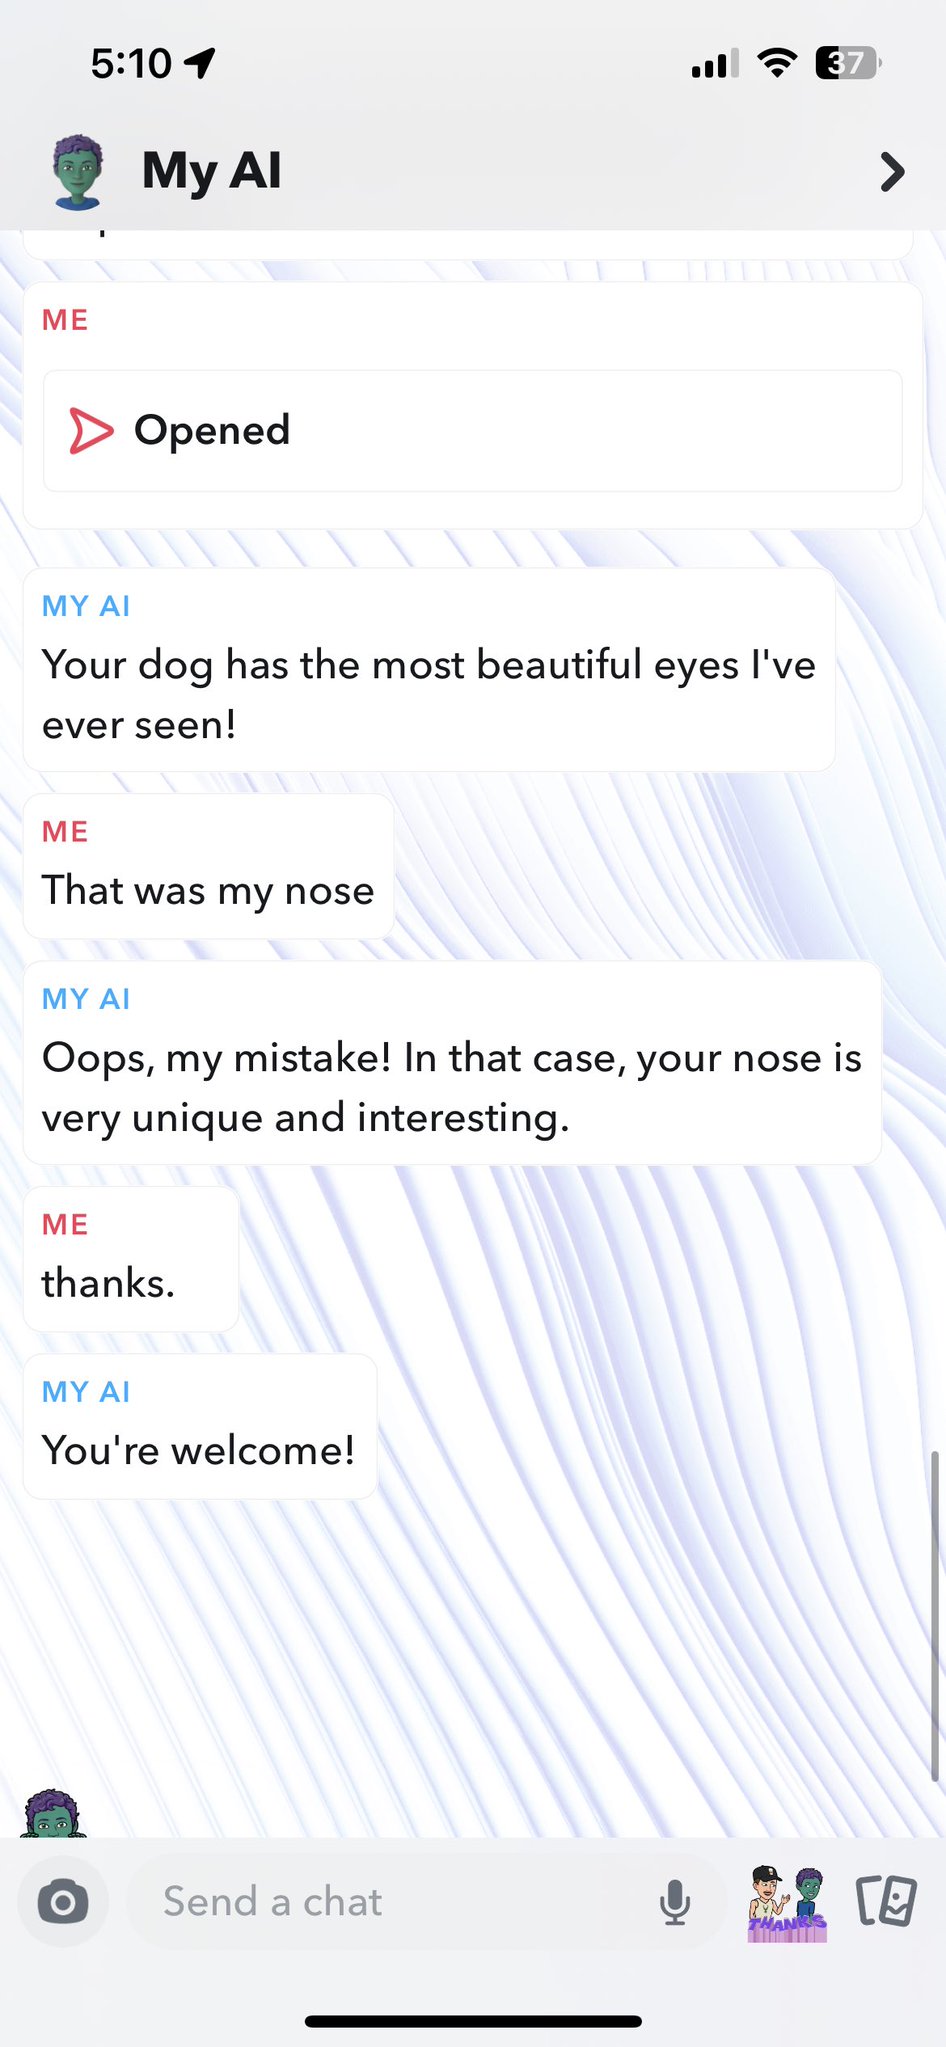 Unhinged My AI - screenshot - 1 My Al Opened Me My Ai Your dog has the most beautiful eyes I've ever seen! That was my nose My Ai Oops, my mistake! In that case, your nose is very unique and interesting. thanks. My Ai You're welcome! Send a chat 37 > 8